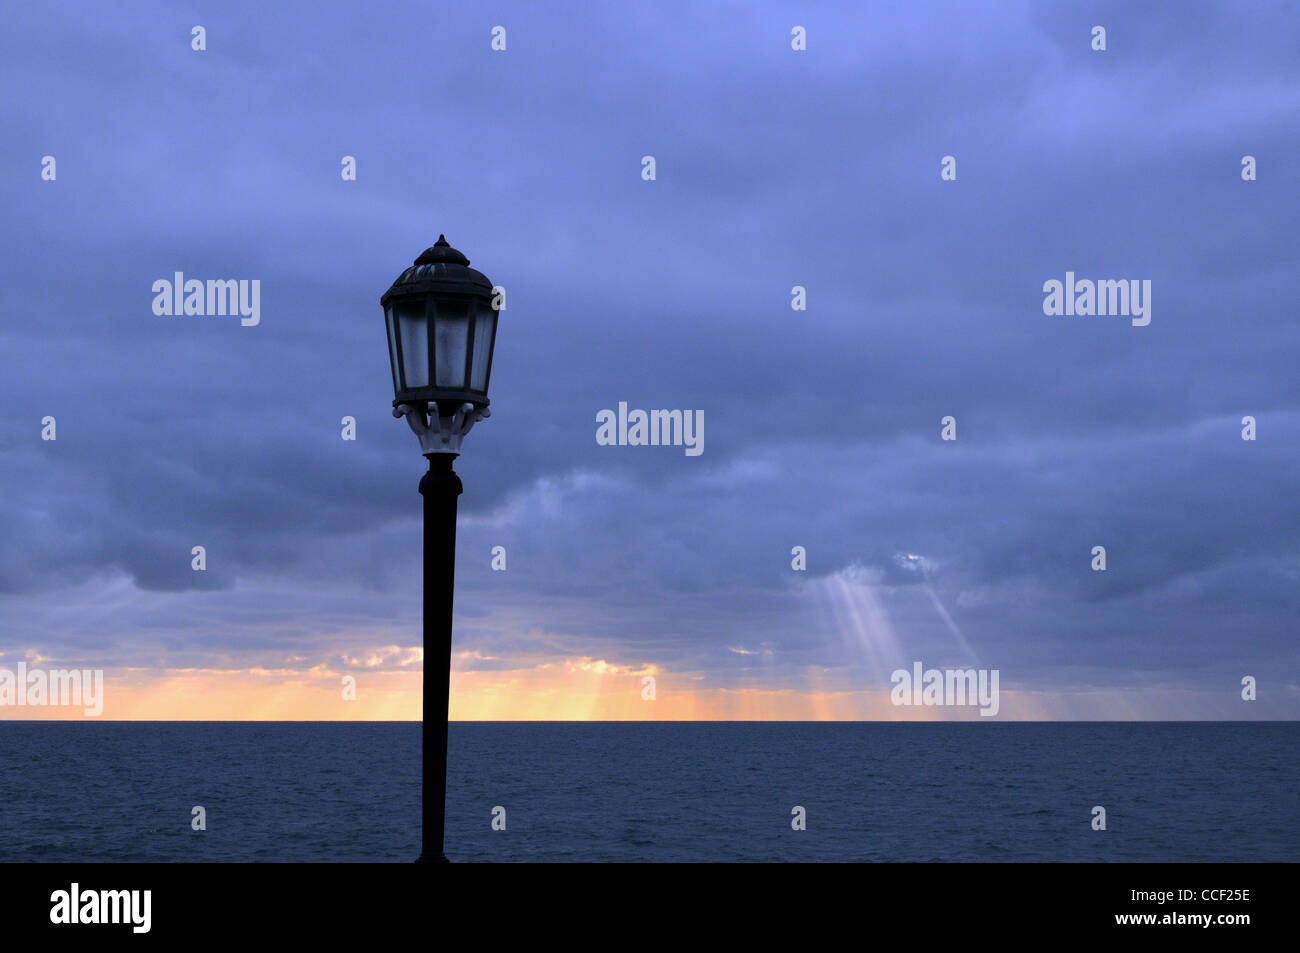 Winter seascape with lamp post in foreground,Worthing Stock Photo